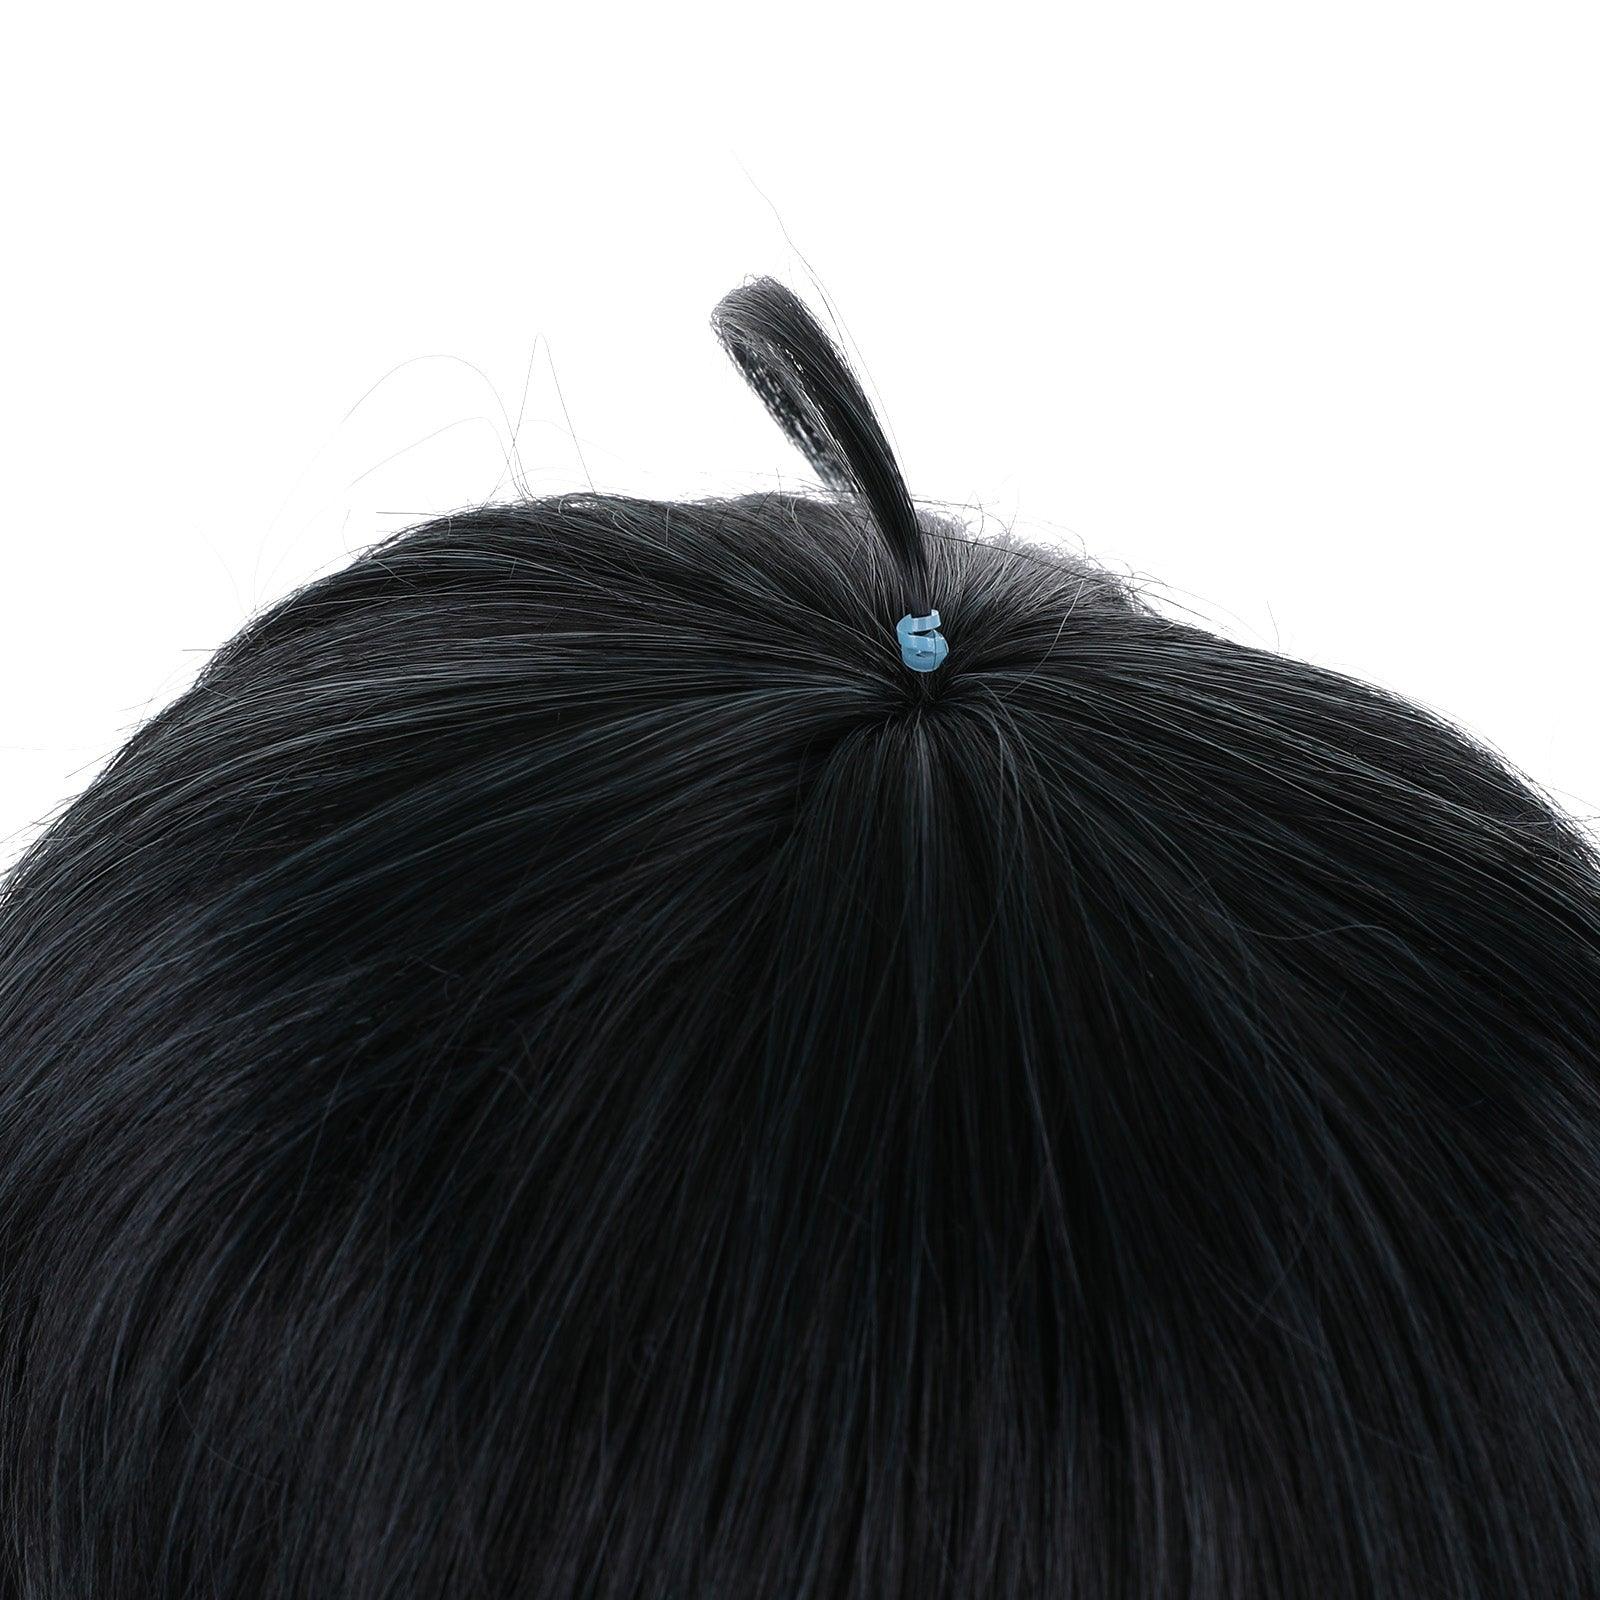 coscrew Anime Cosplay Wigs for TAKT ASAHINA black Cosplay Wig of takt op.Destiny 529D - coscrew